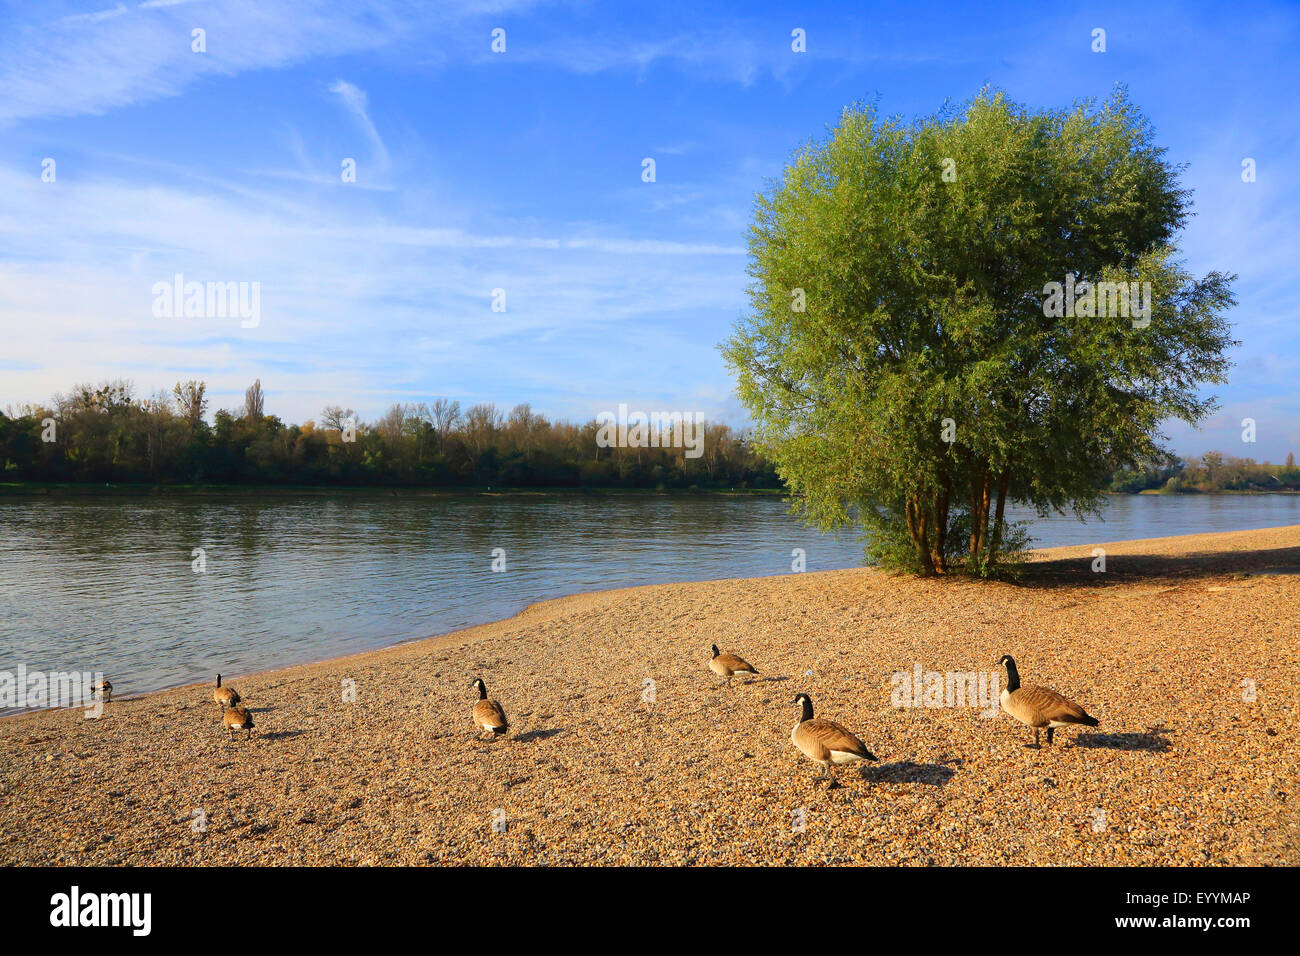 Canada goose (Branta canadensis), Canada geese at the Rhine shore, Germany Stock Photo